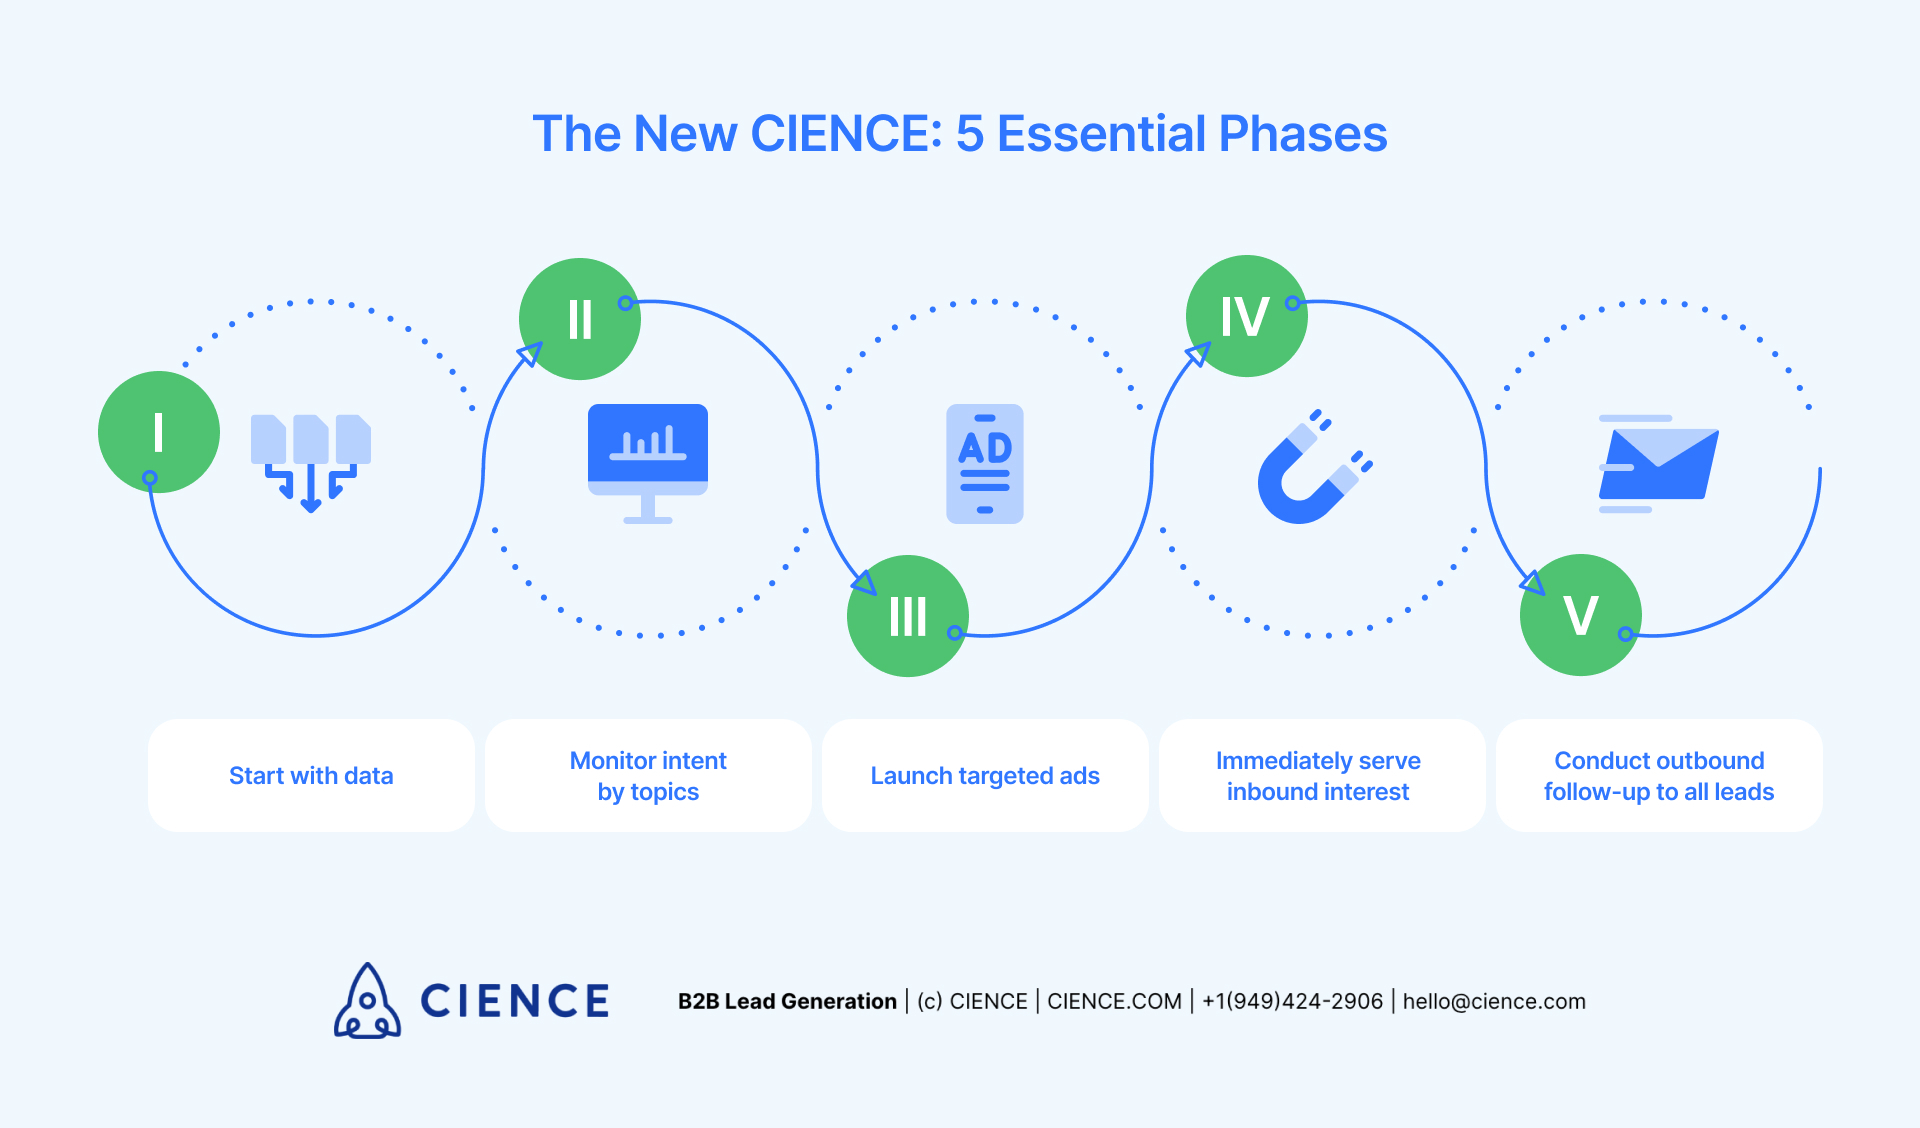 The 5 New Phases of CIENCE